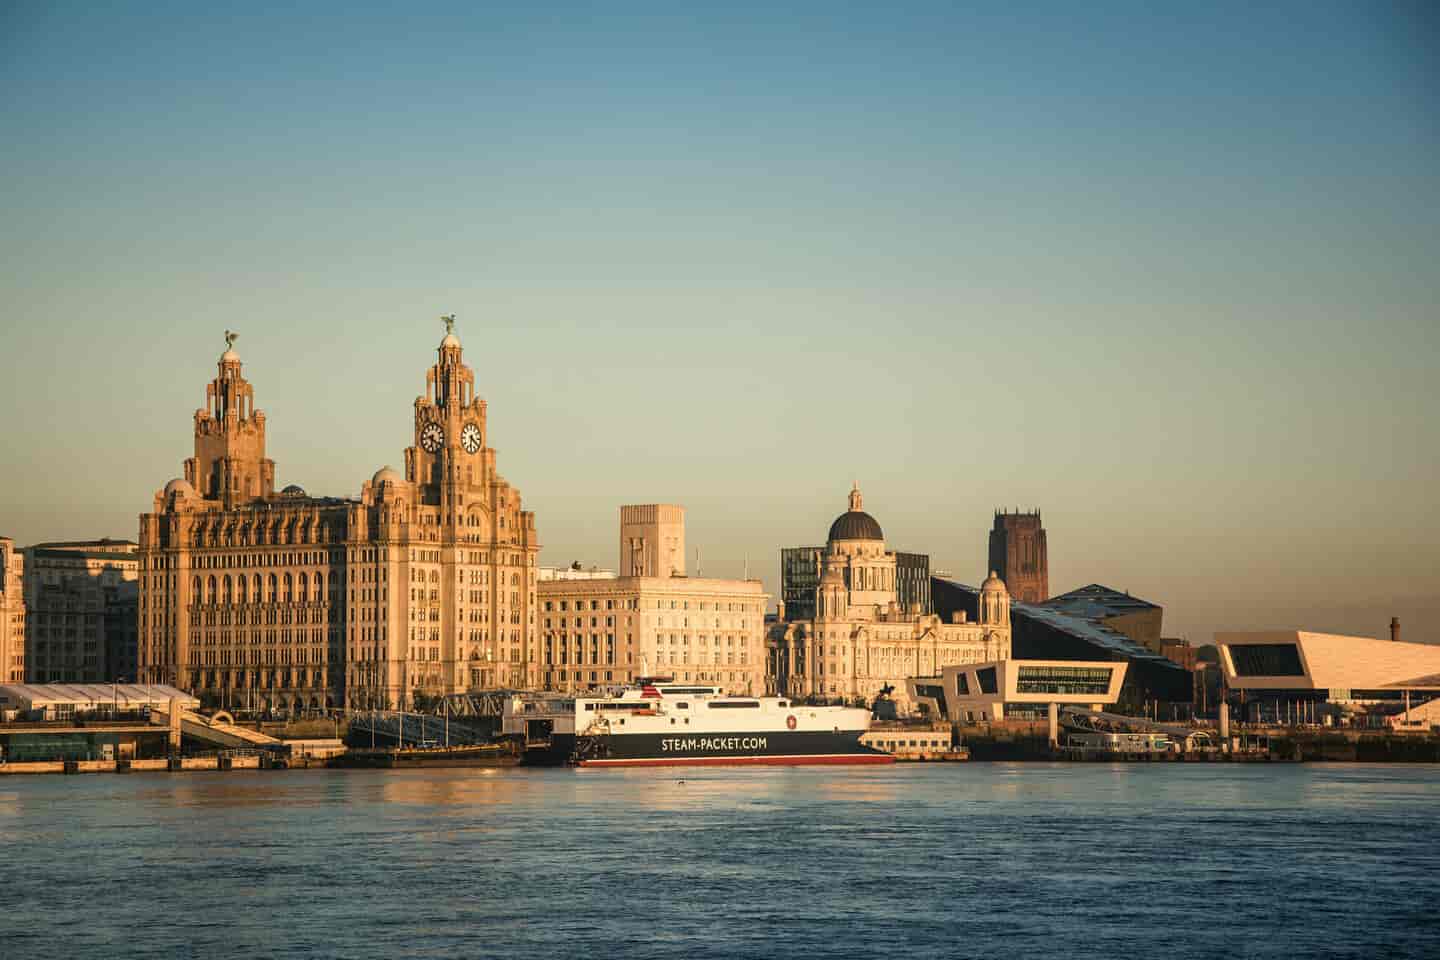 Student Accommodation in Liverpool - Sunrise over Liverpool Waterfront and the River Mersey